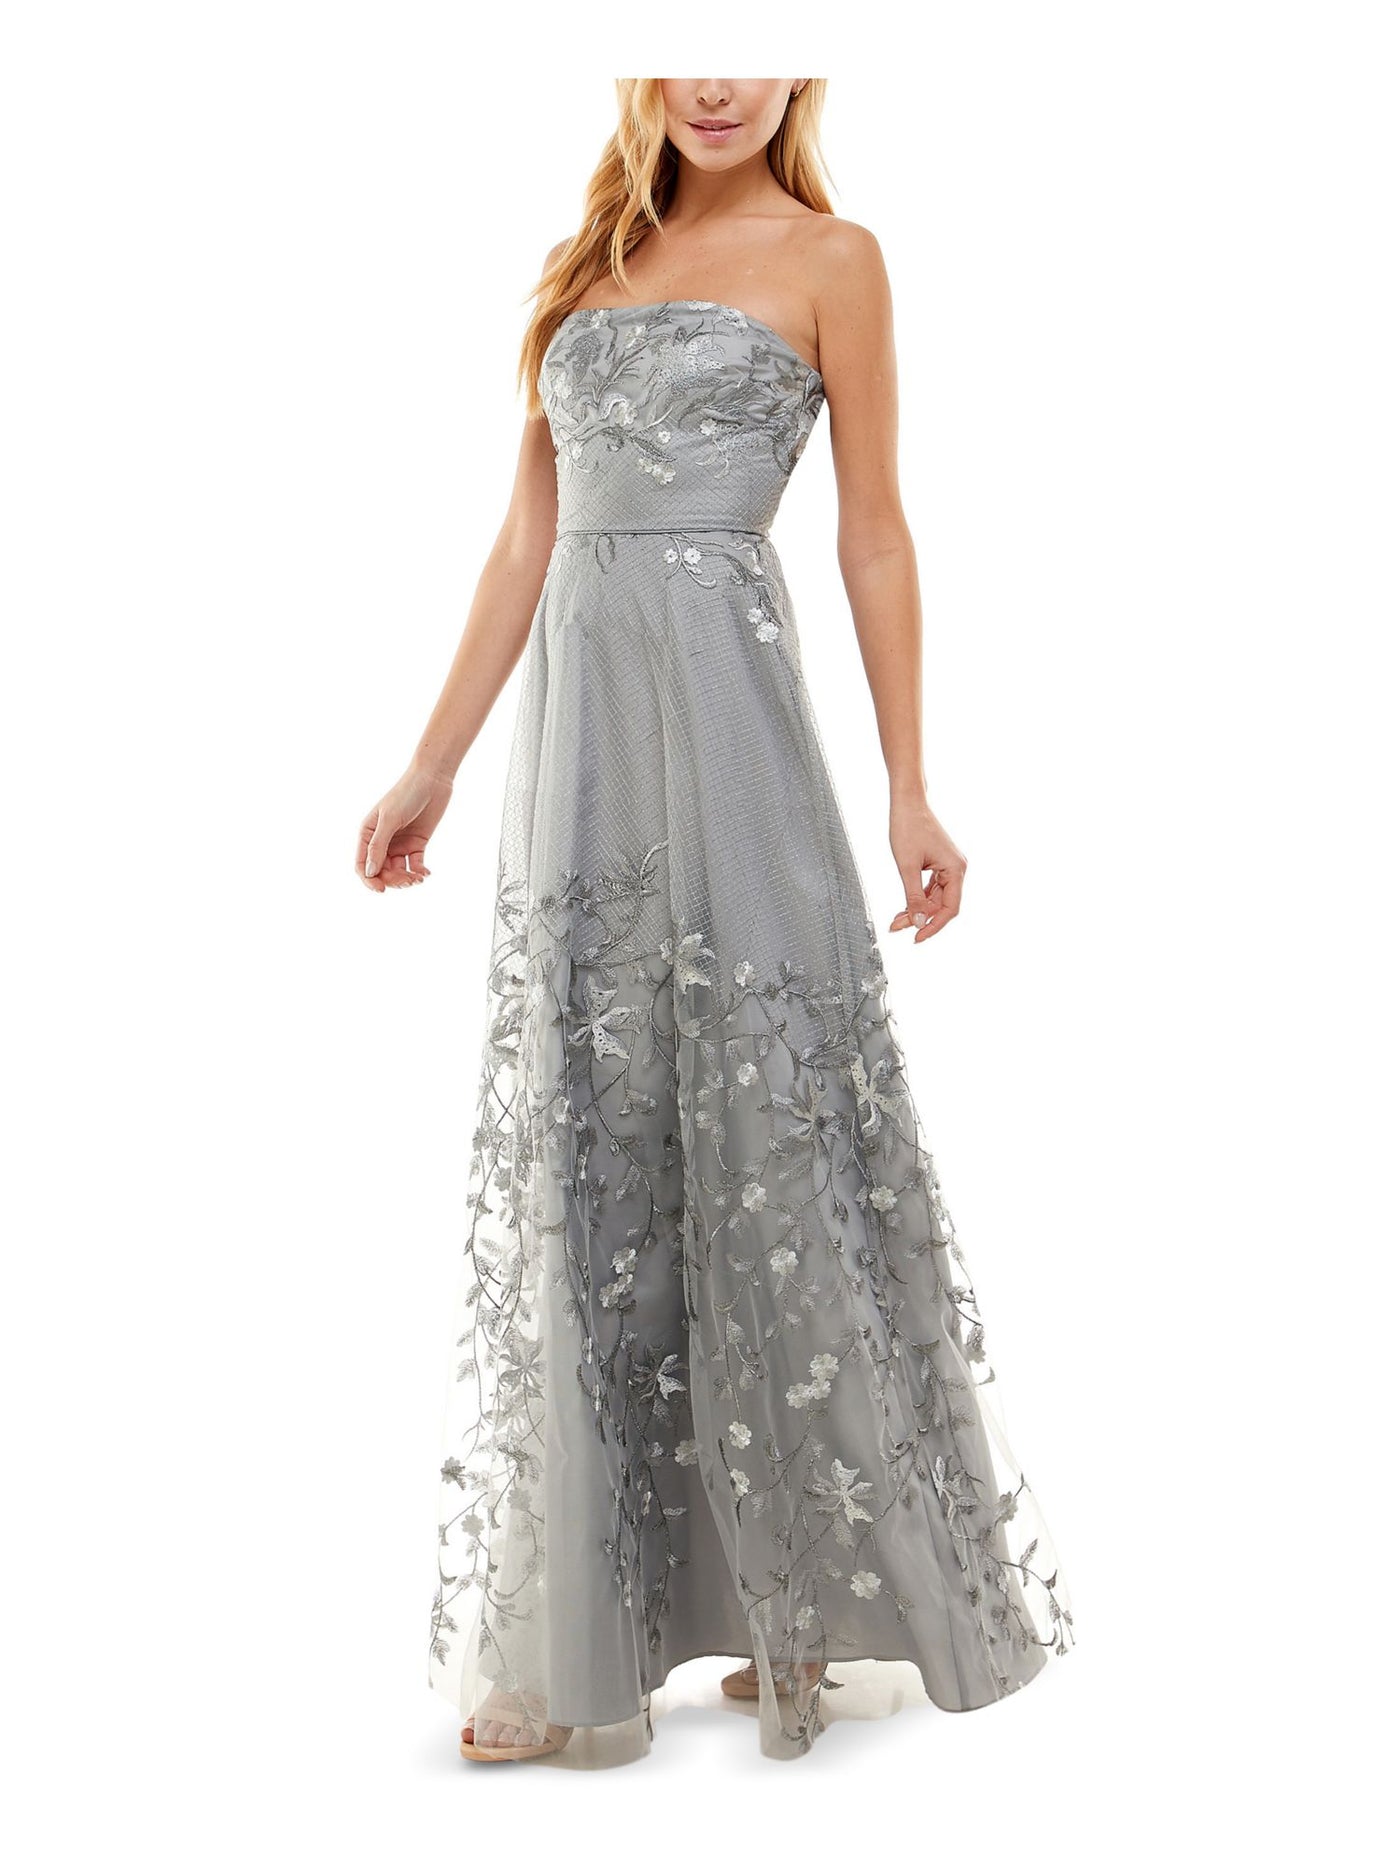 CITY STUDIO Womens Gray Embroidered Lace Zippered Sleeveless Strapless Full-Length  Gown Prom Dress Juniors 3